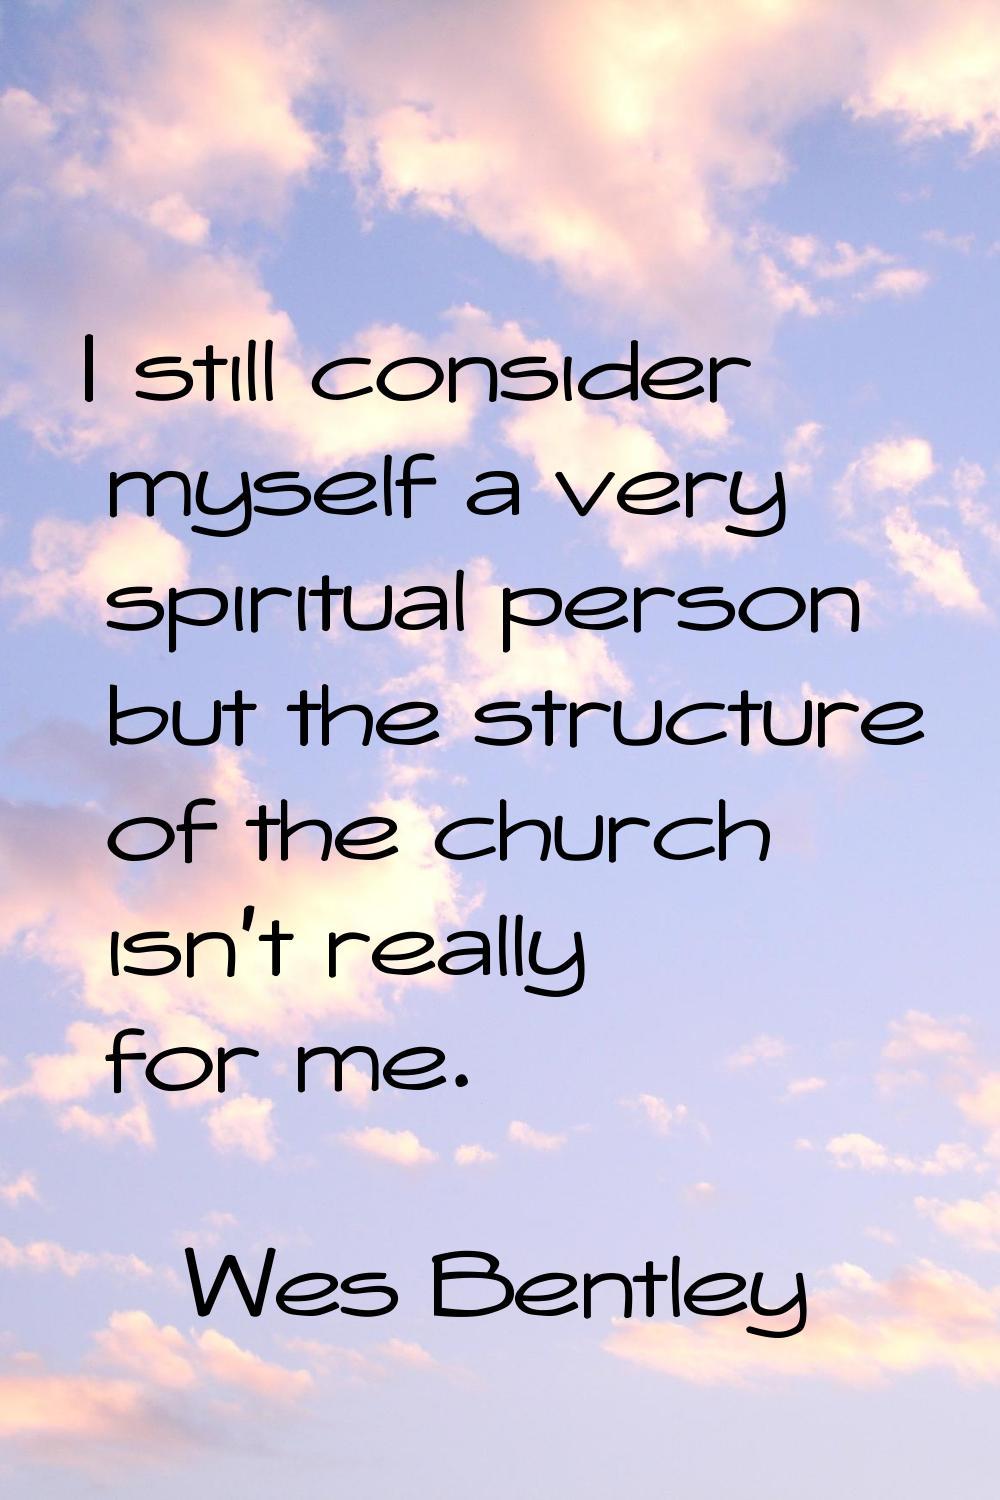 I still consider myself a very spiritual person but the structure of the church isn't really for me